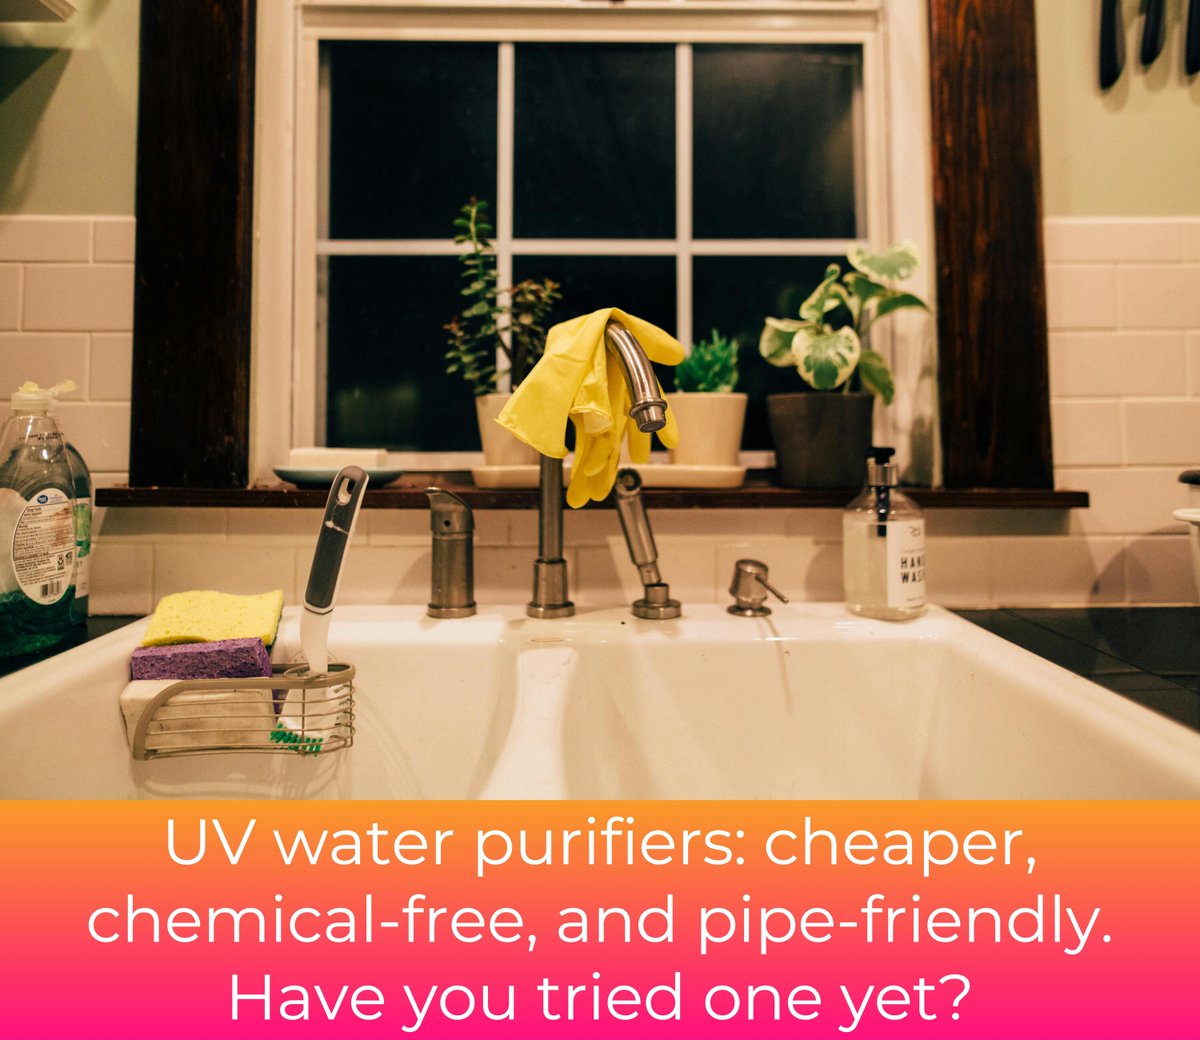 Did you know UV water purifiers are cheaper, chemical-free, and pipe-friendly? But they do have a couple of downsides. Learn more and share your thoughts! üíßüí° #WaterPurification